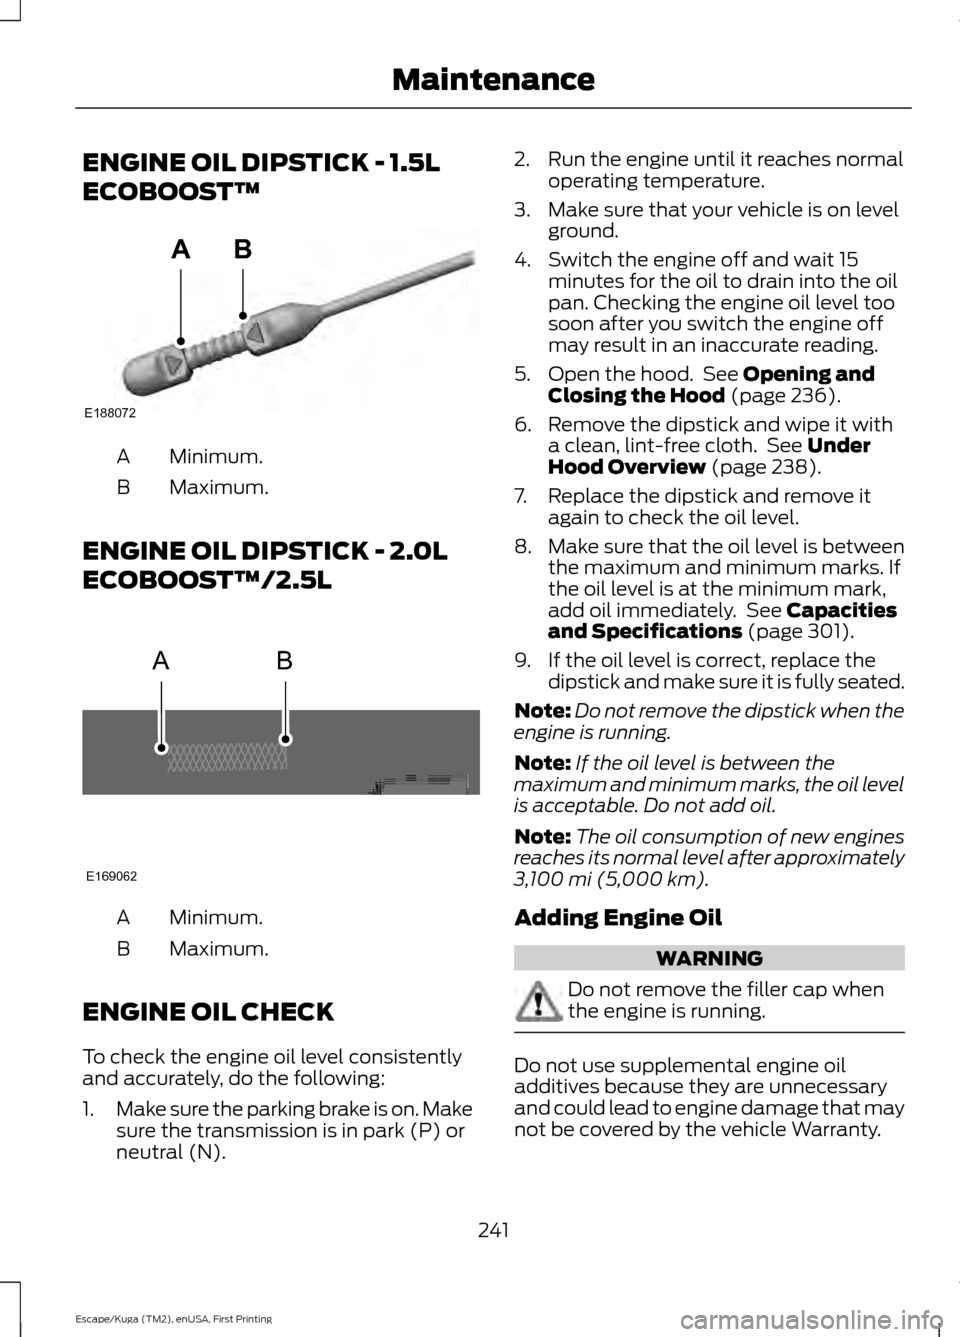 FORD ESCAPE 2017 3.G Owners Manual ENGINE OIL DIPSTICK - 1.5L
ECOBOOST™
Minimum.
A
Maximum.
B
ENGINE OIL DIPSTICK - 2.0L
ECOBOOST™/2.5L Minimum.
A
Maximum.
B
ENGINE OIL CHECK
To check the engine oil level consistently
and accuratel